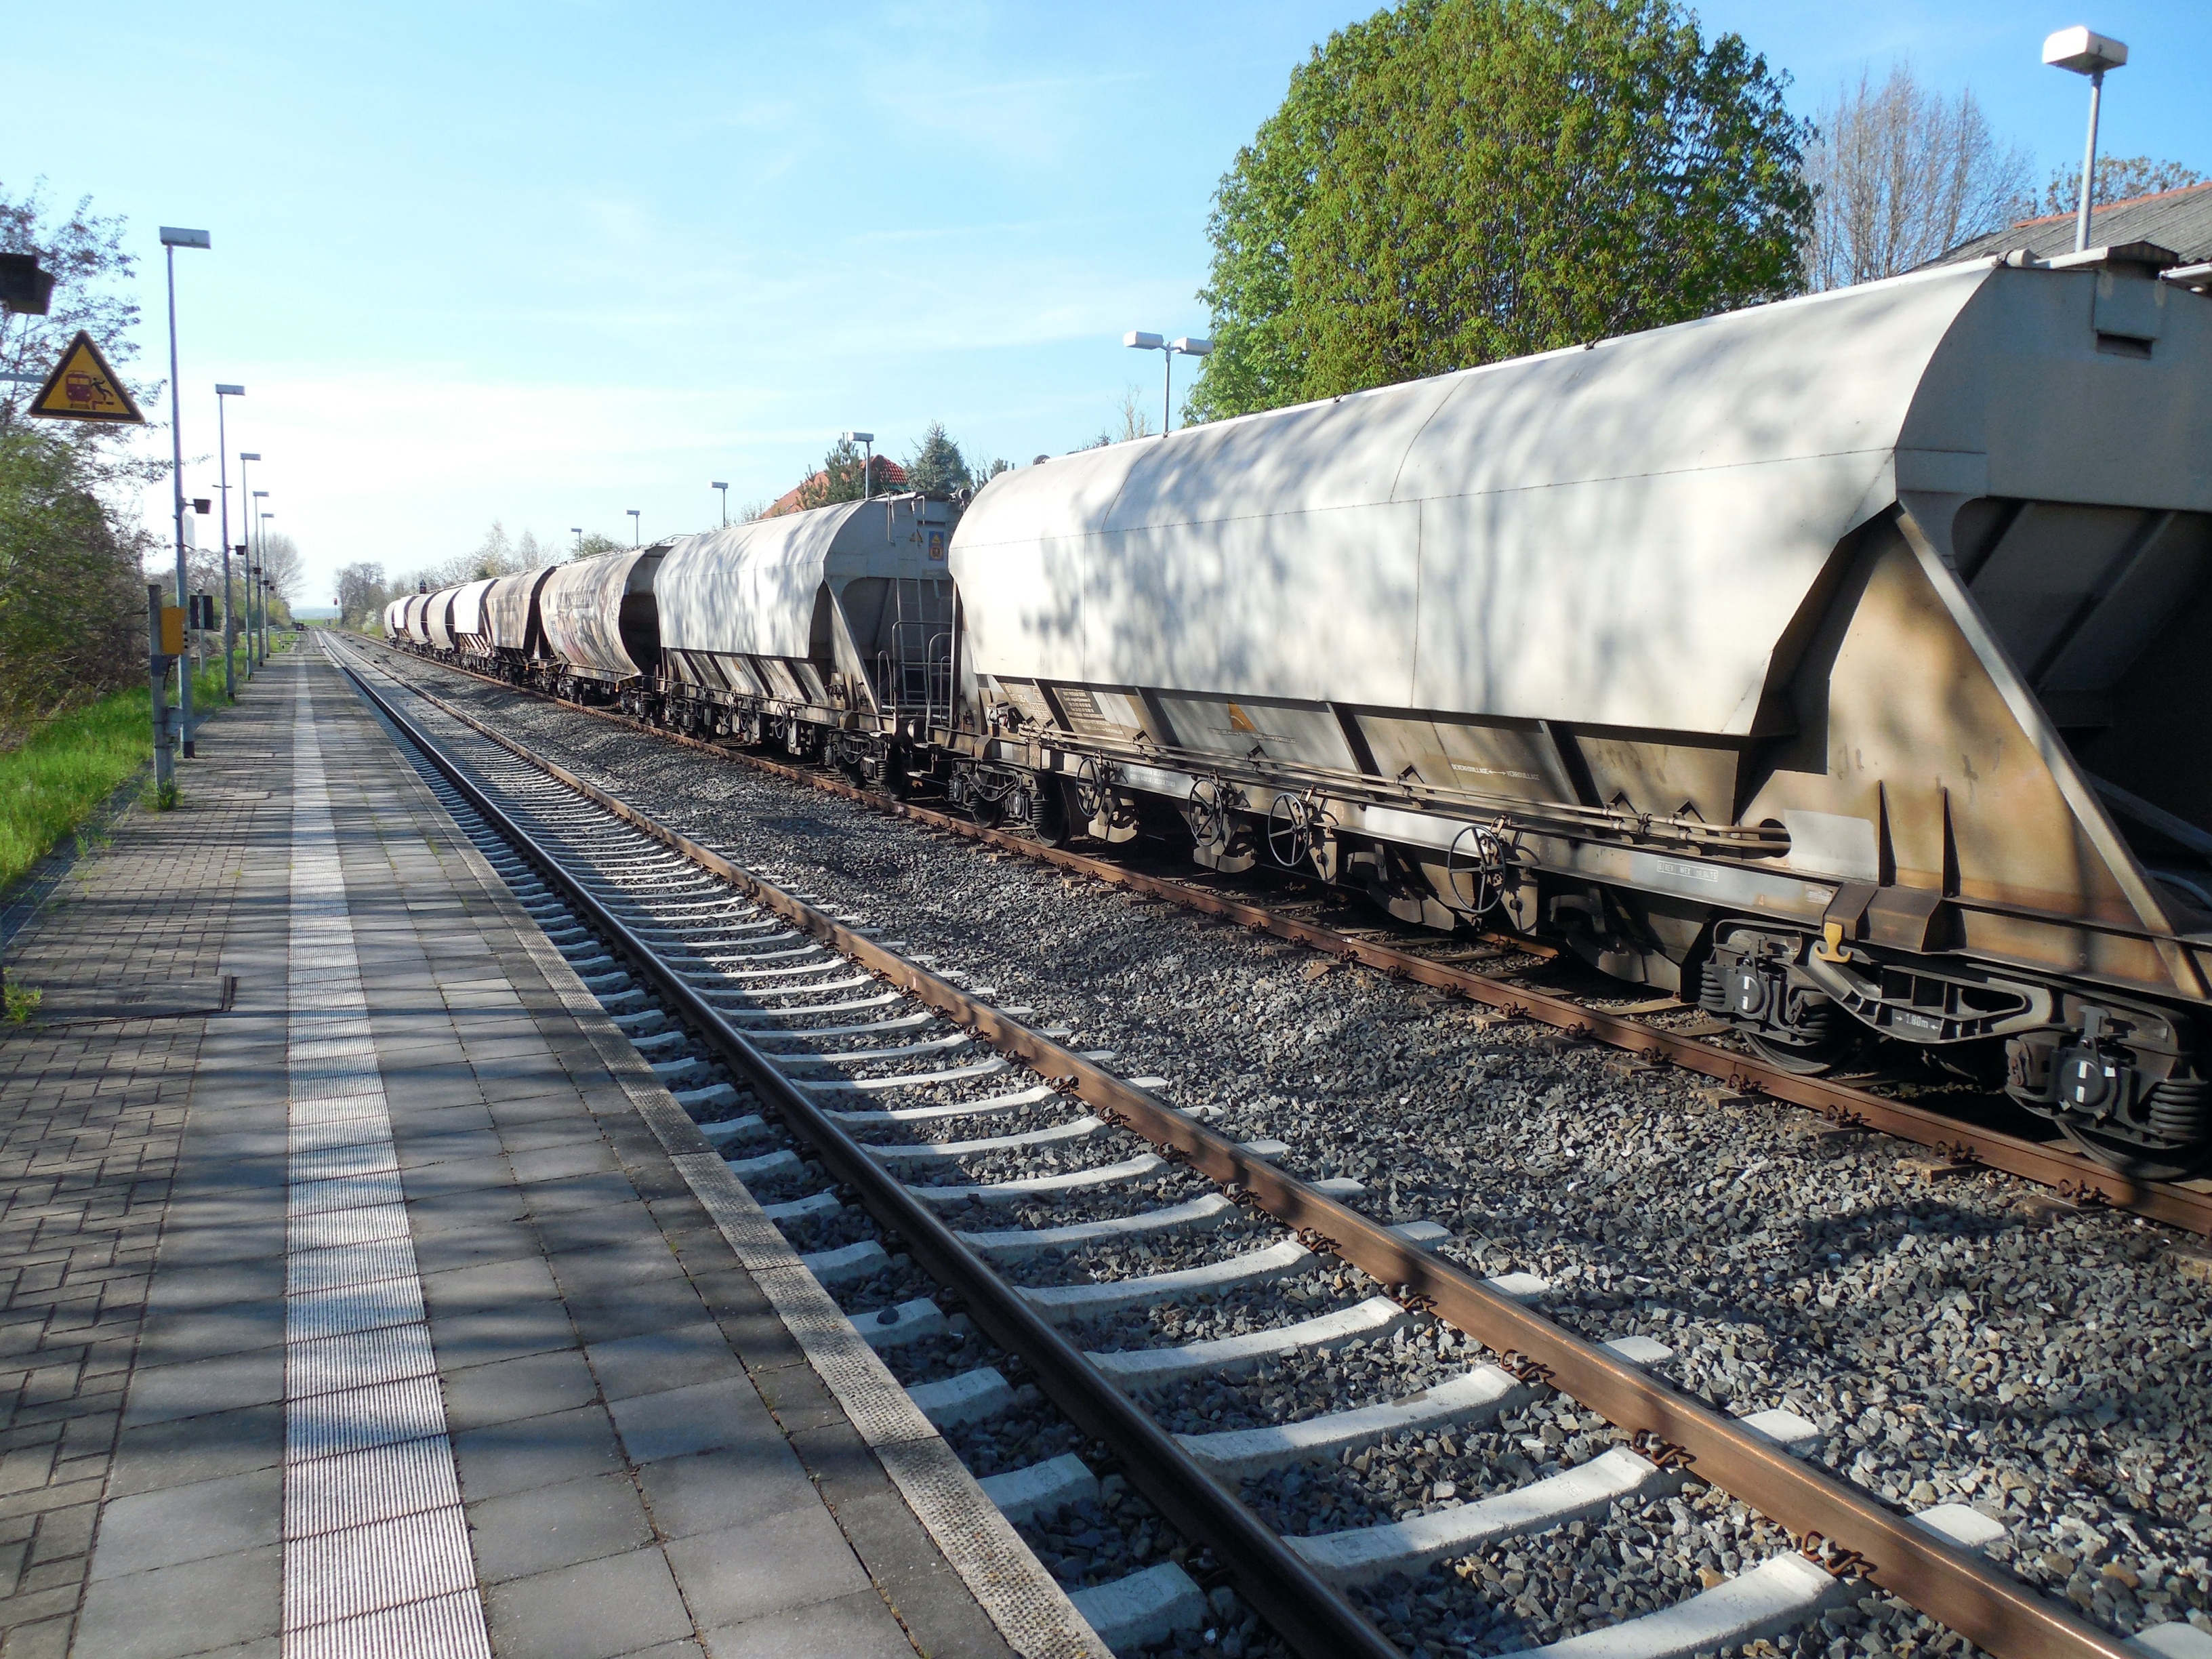 Freight Train At A Railway Station by succo